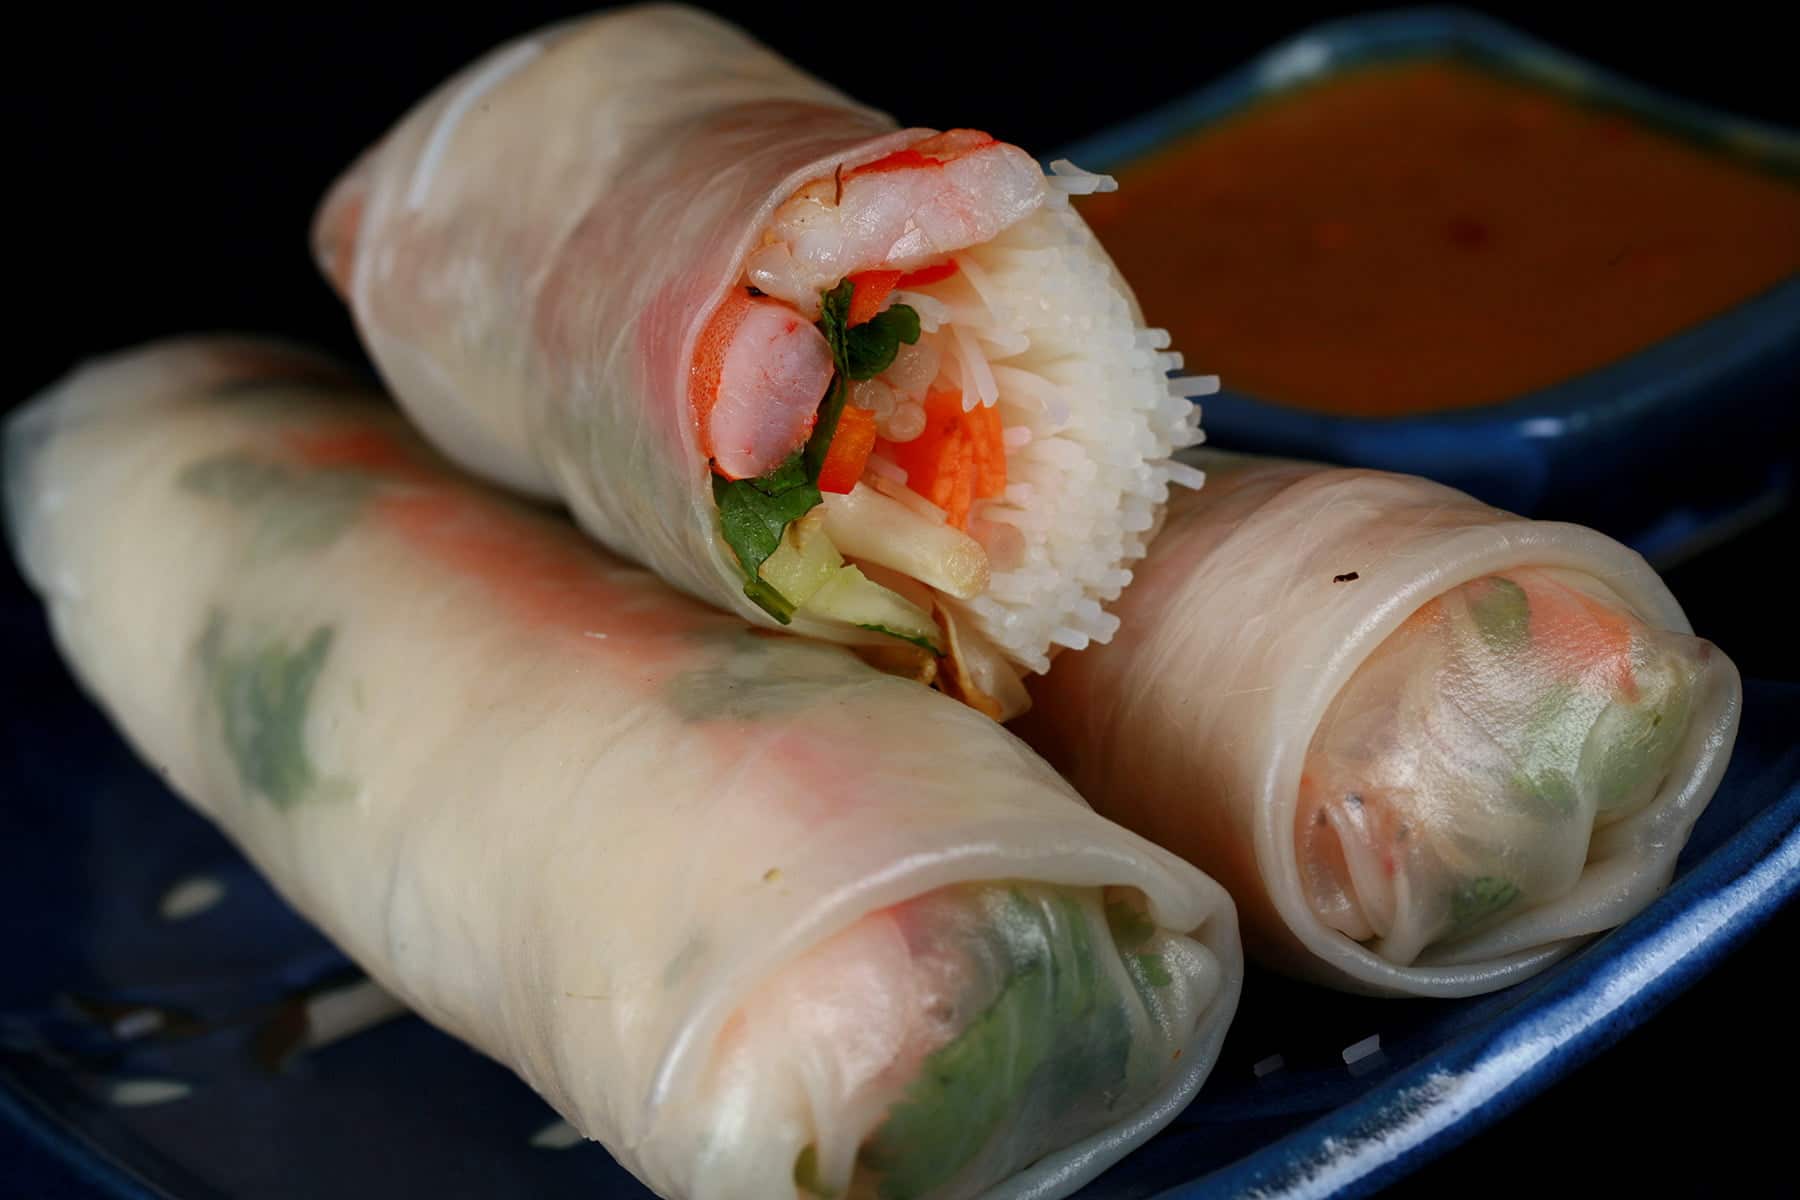 2 and a half curried shrimp spring rolls are arranged on a blue plate, with a small bowl of spicy peanut dip next to it.